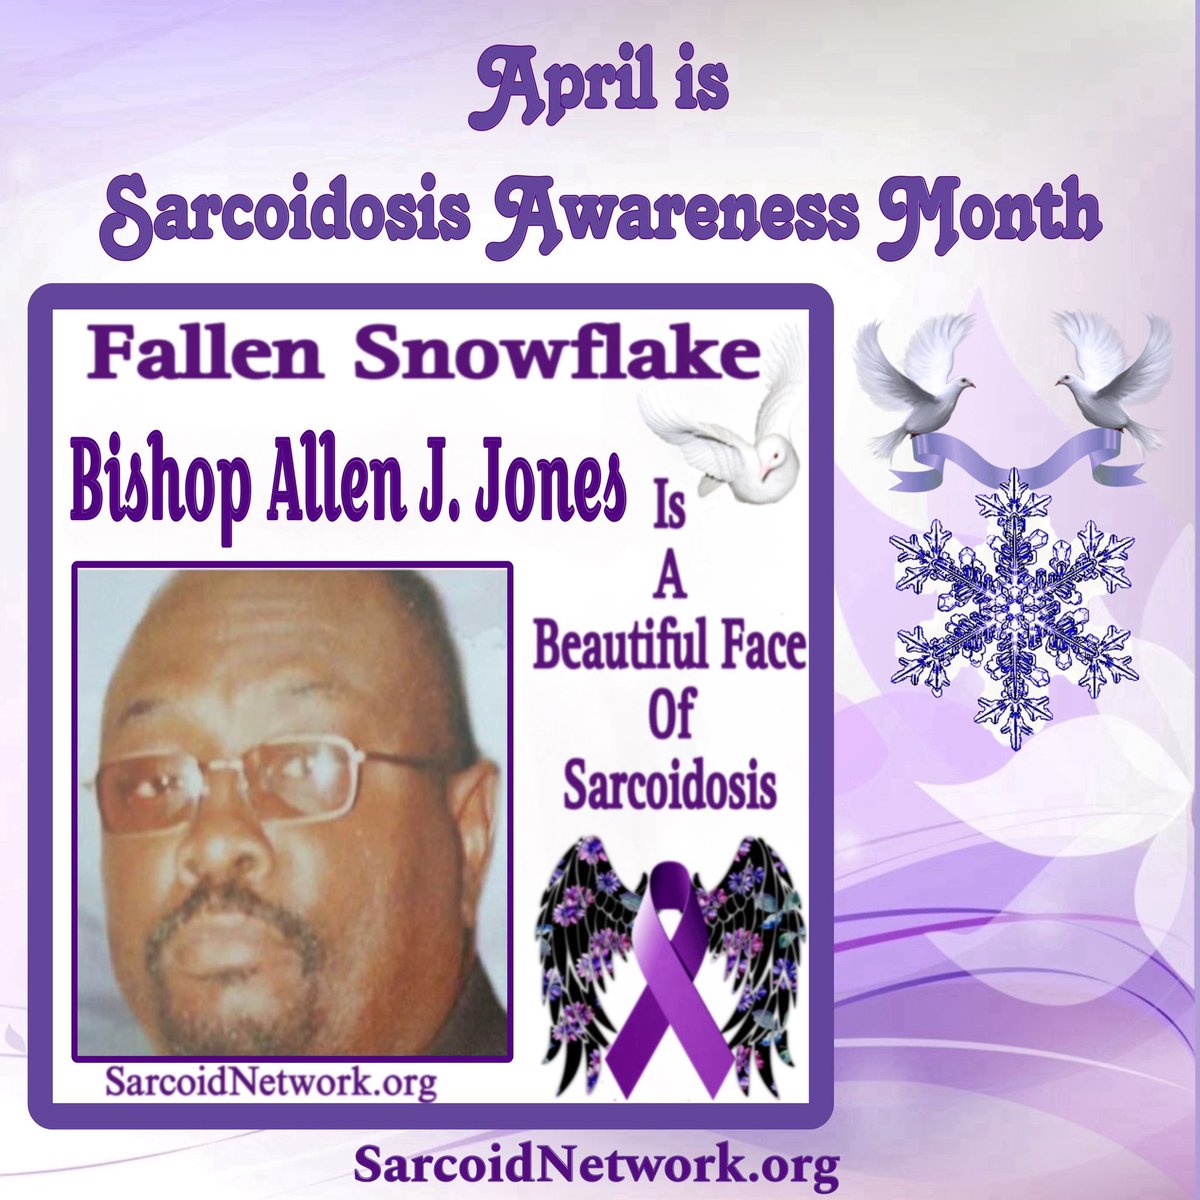 This is our Sarcoidosis Brother Fallen Snowflake Bishop Allen J. Jones and he is a Beautiful Face of Sarcoidosis.💜 #Sarcoidosis #raredisease #preciousmemories #patientadvocate #sarcoidosisadvocate #beautifulfacesofsarcoidosis #sarcoidosisawarenessmonth